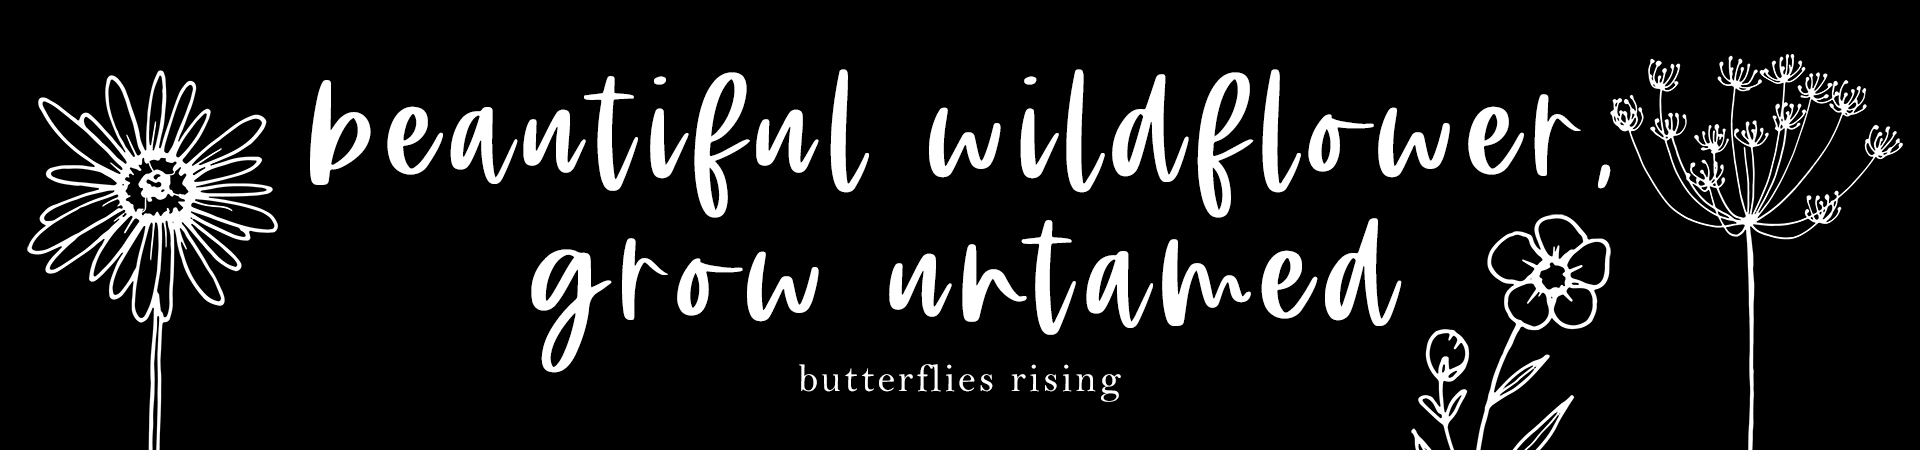 beautiful wildflower, grow untamed - butterflies rising quote and poem - wild spirit collection